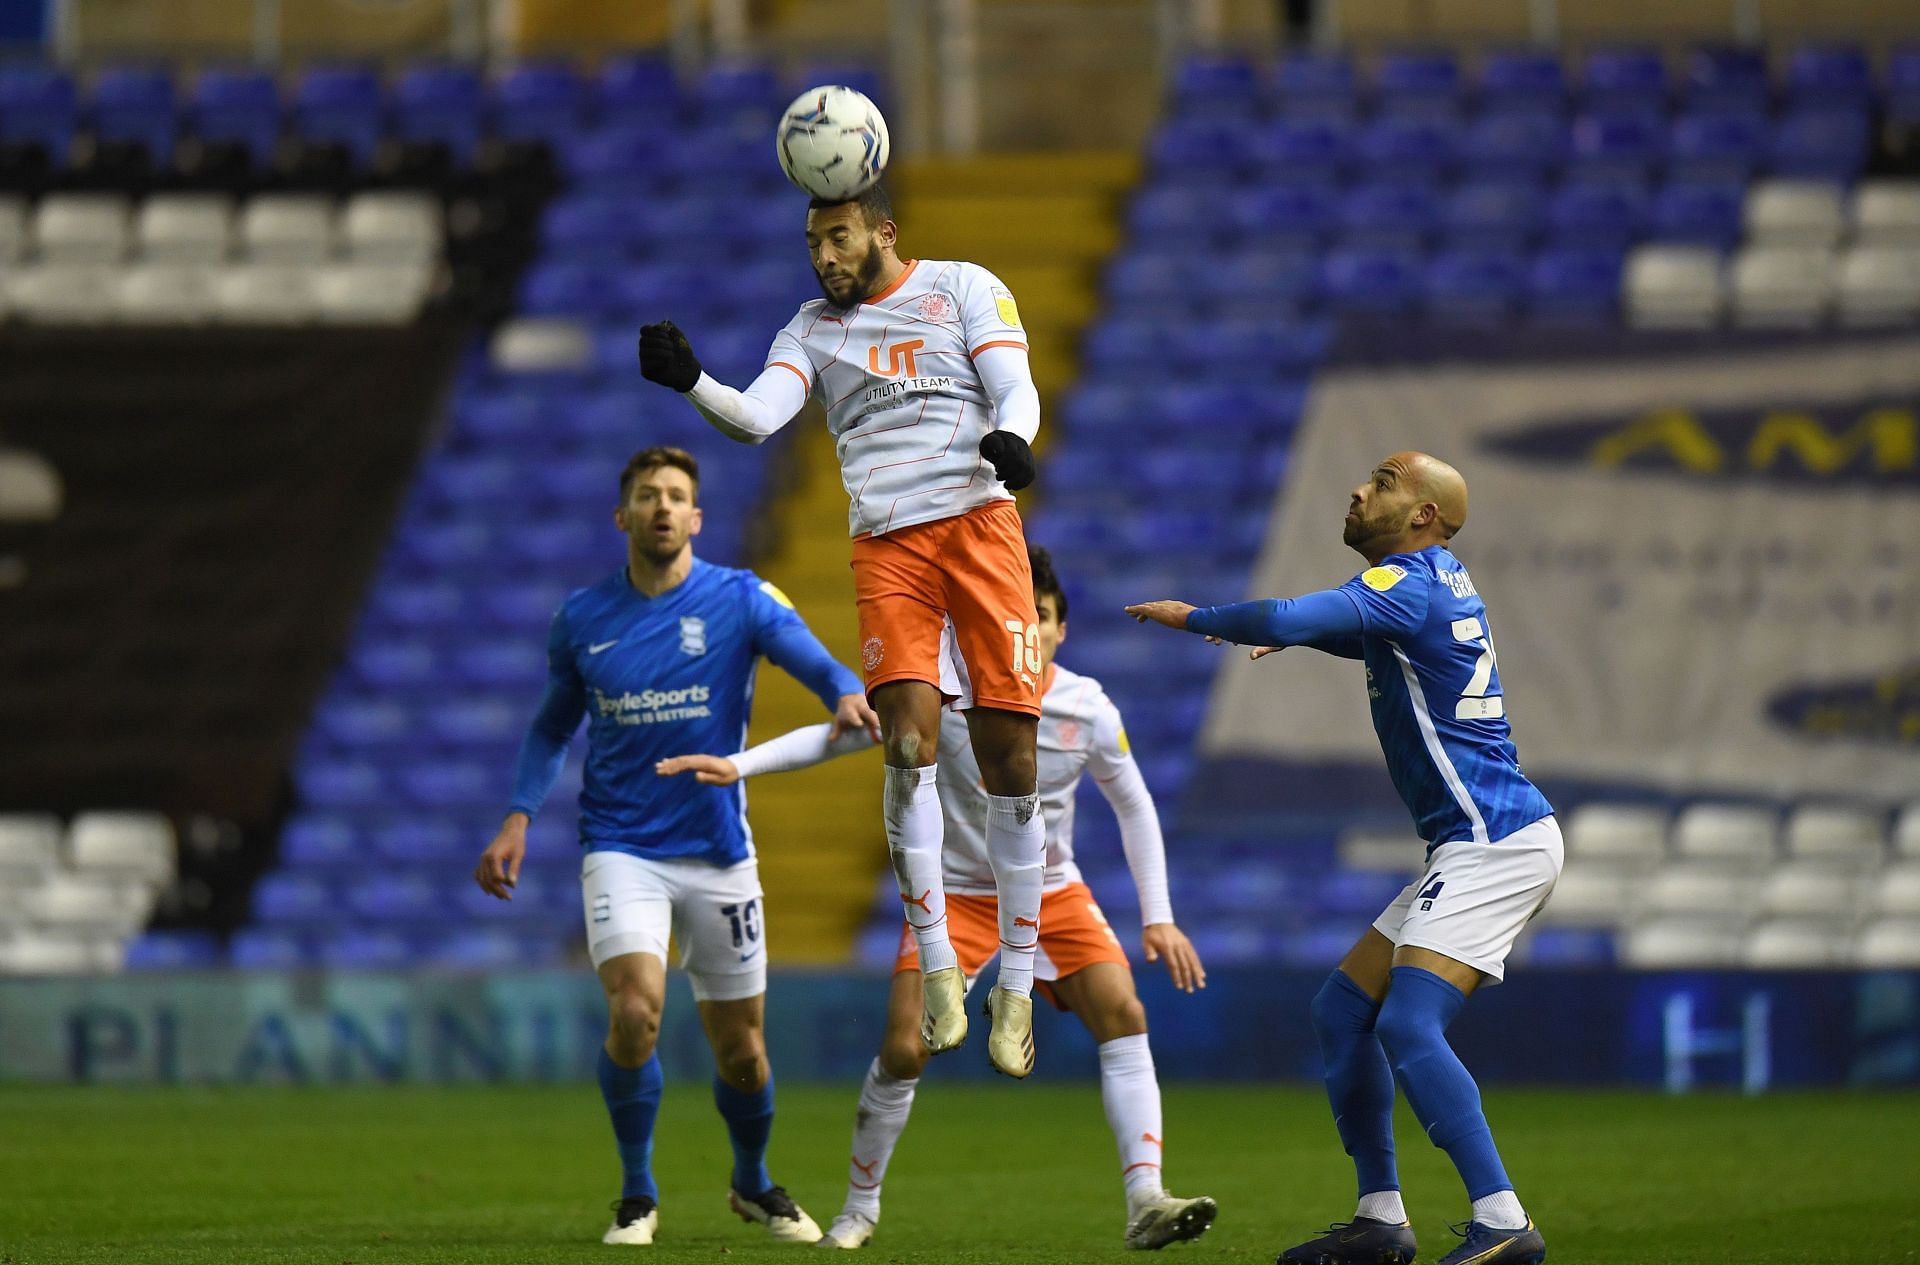 Blackpool will face Huddersfield Town on Sunday - Sky Bet Championship